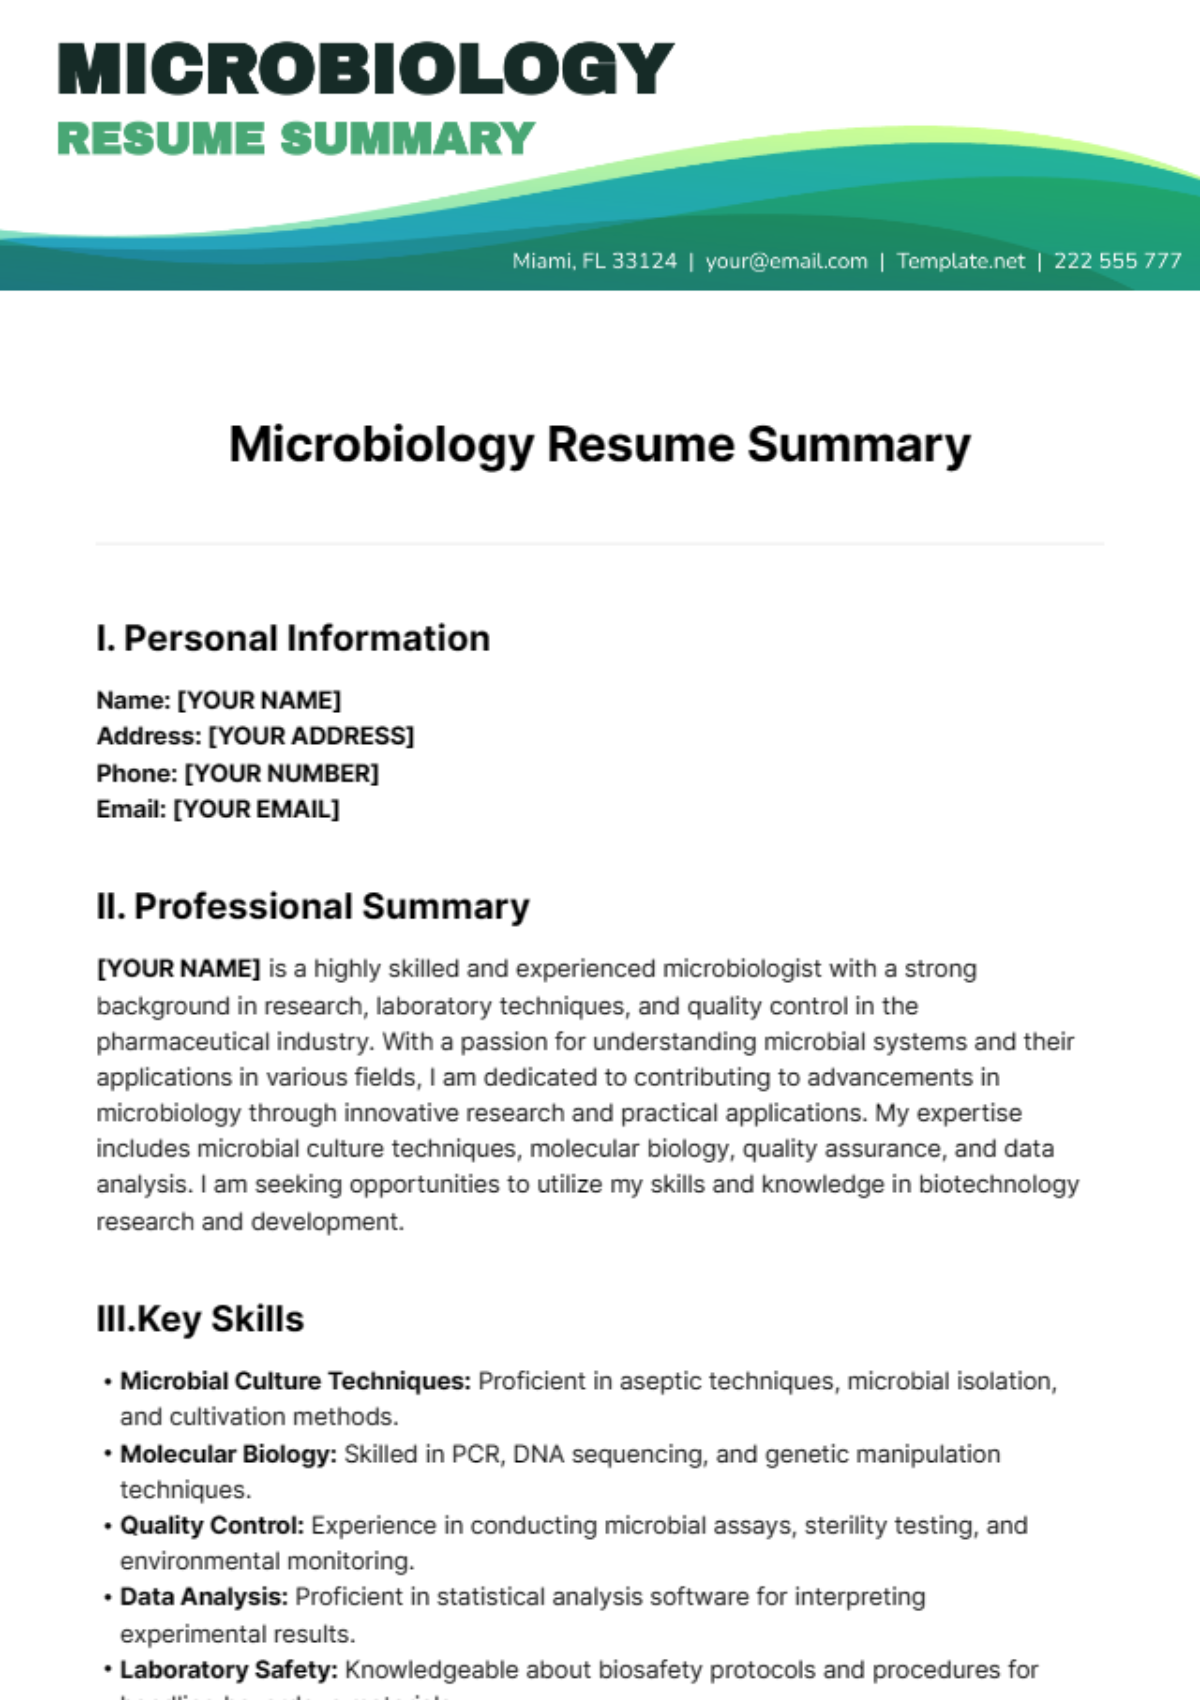 Microbiology Resume Summary Template